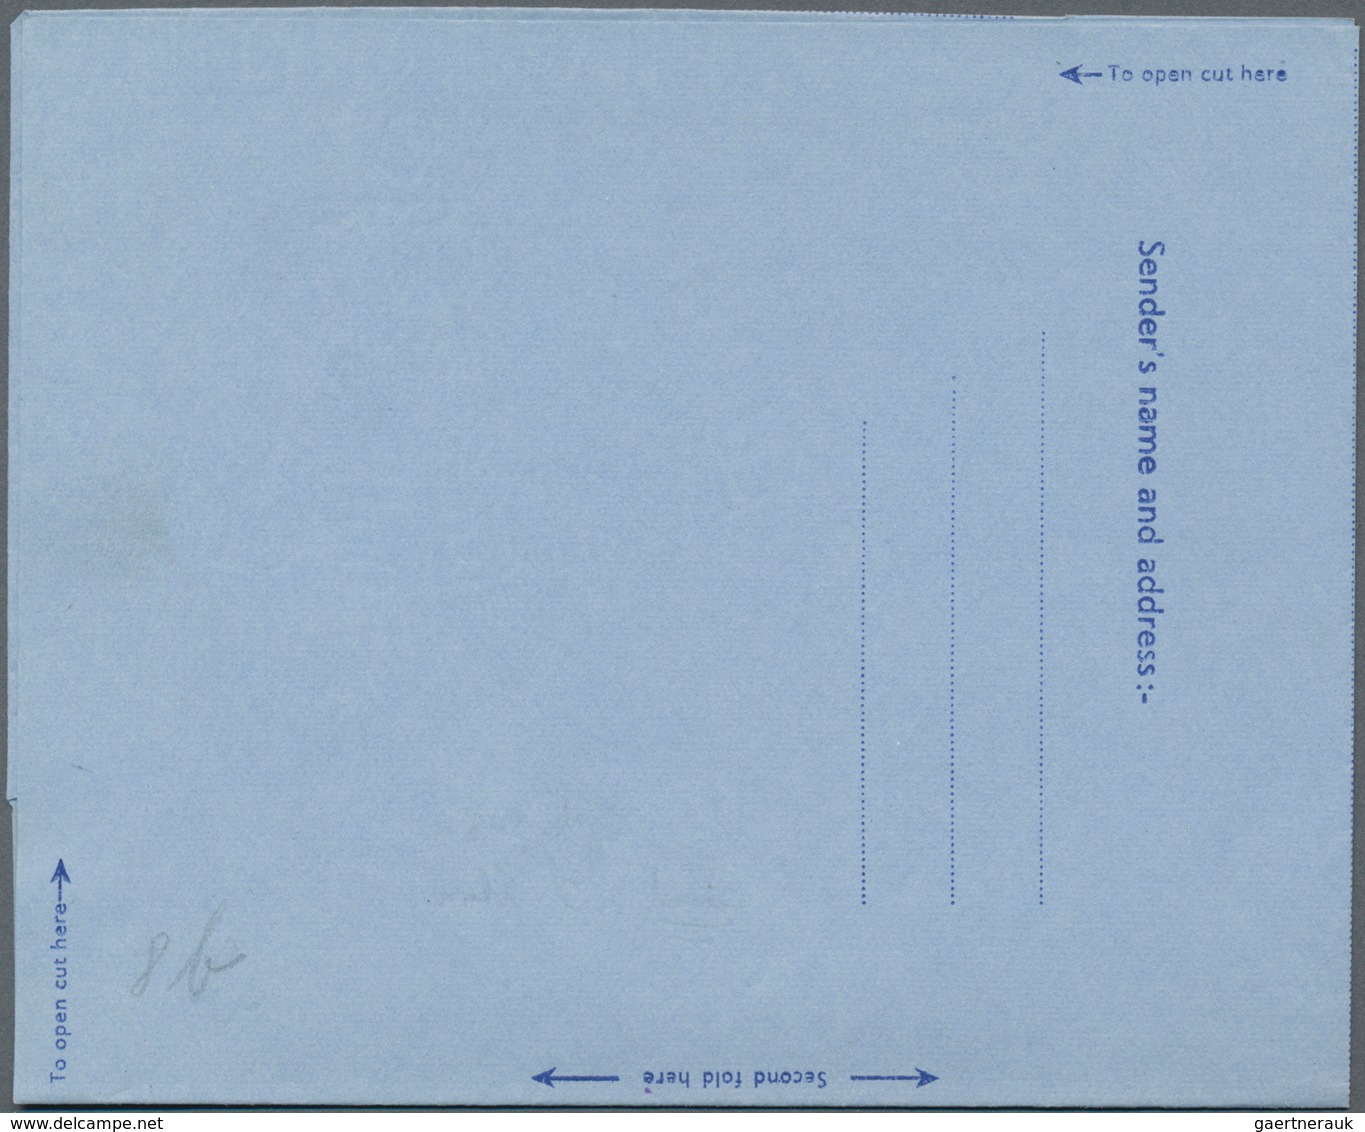 Großbritannien - Ganzsachen: 1949/50 seven unused and commercially used aerograms, with/without wate